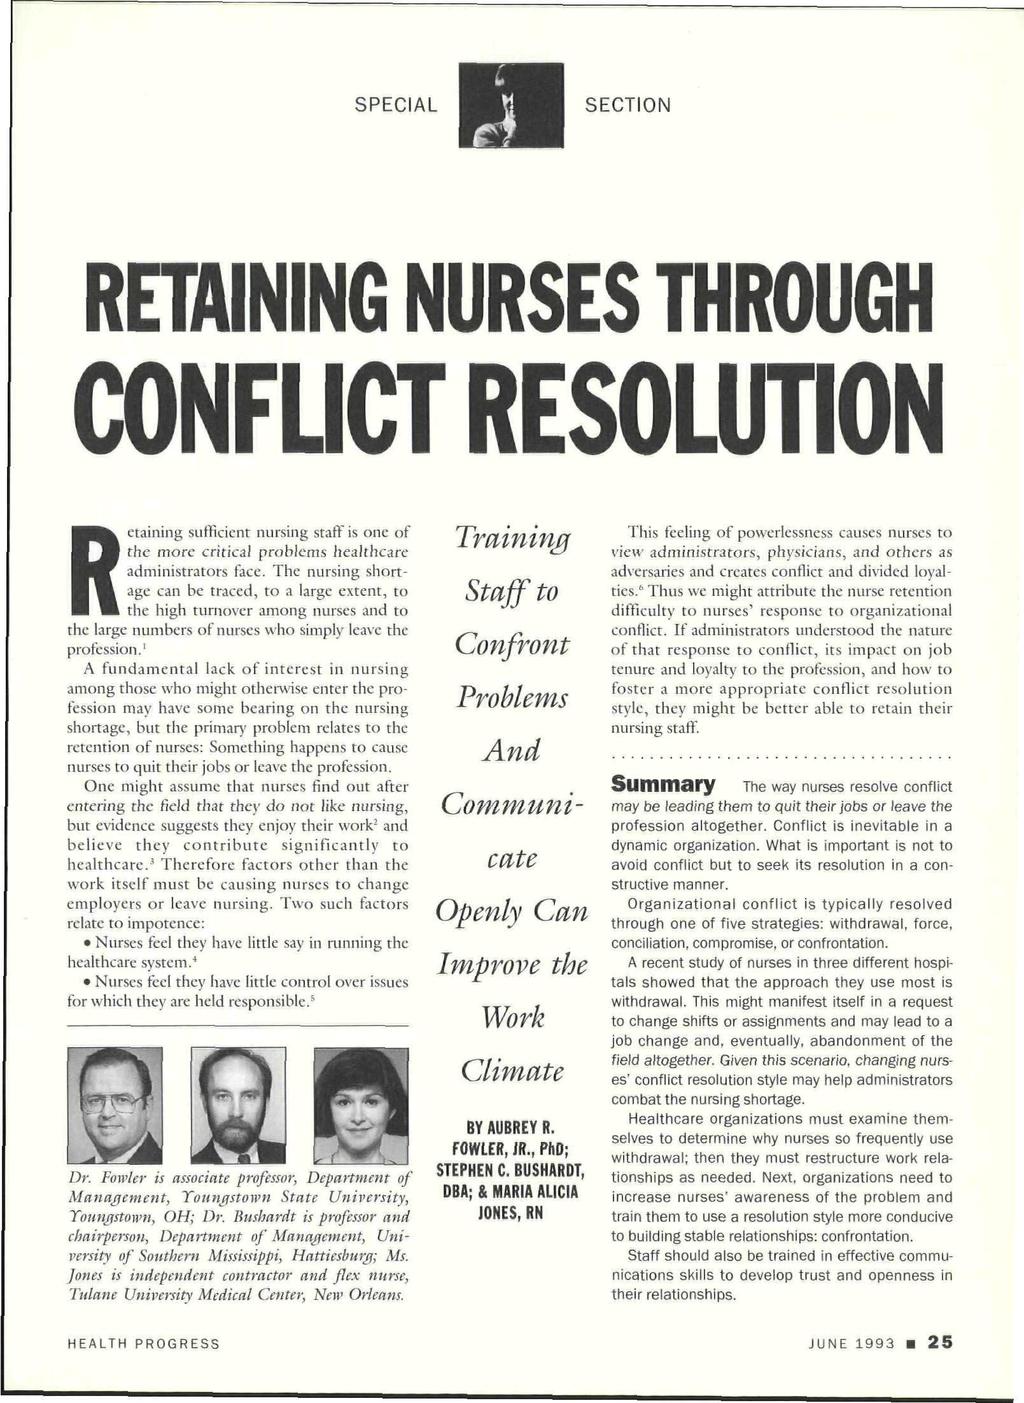 RETAINING NURSES THROUGH CONFLICT RESOLUTION Retaining sufficient nursing staff is one of the more critical problems healthcare administrators face.